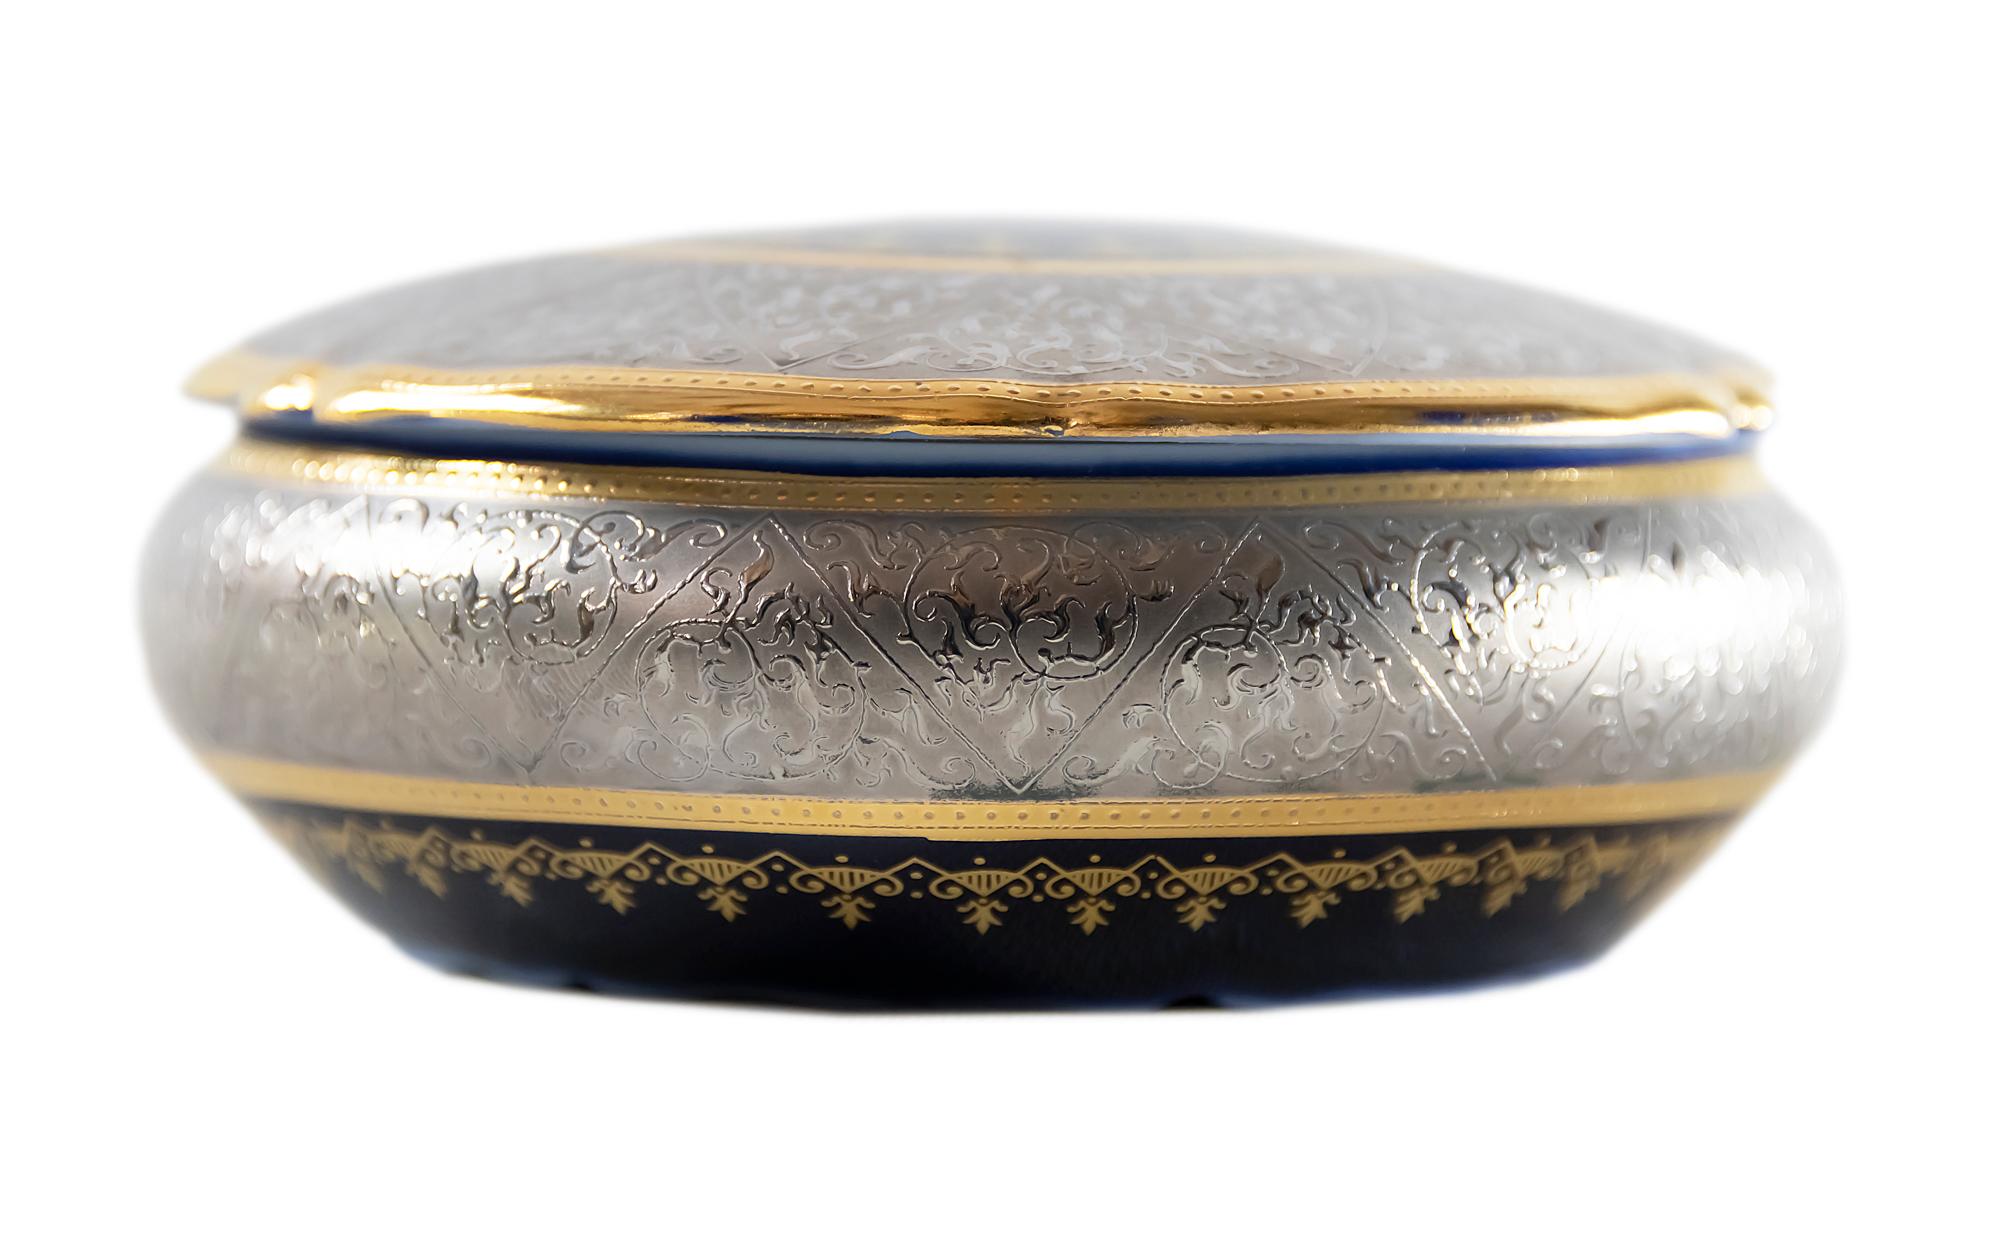 Cobalt blue porcelain jewelry box decorated with silver and gold decor produced by Limoges France.